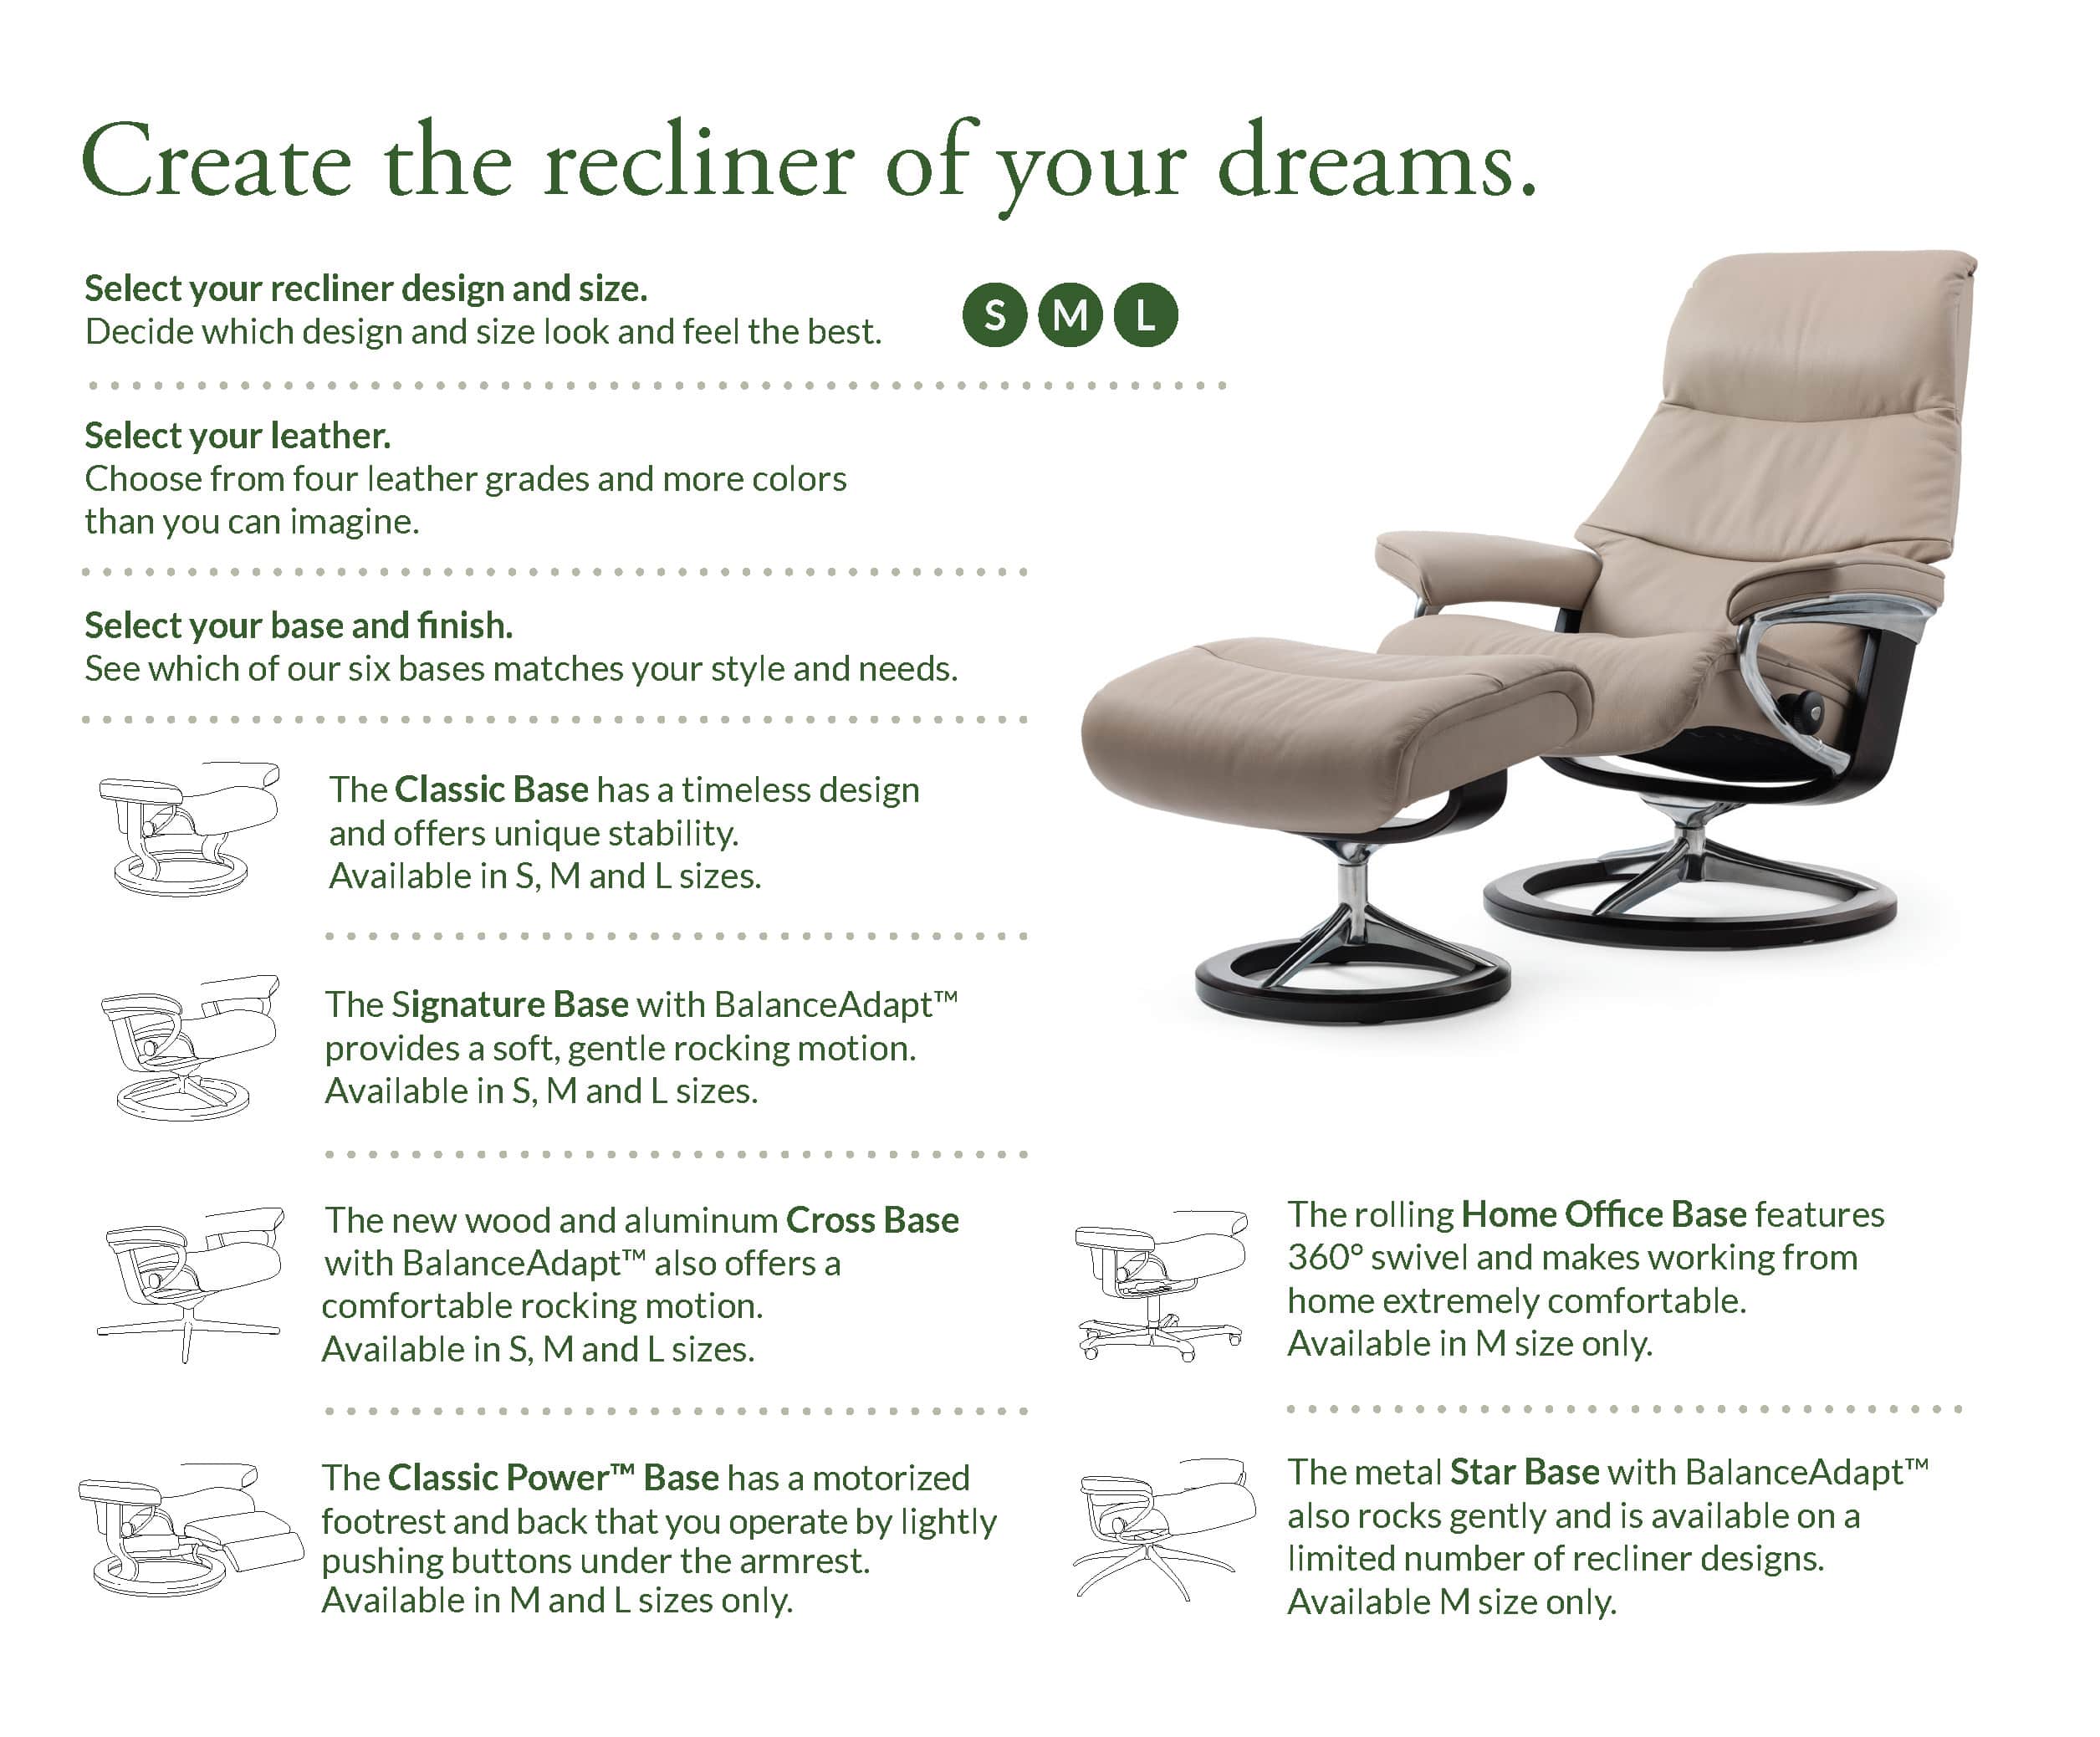 Stressless steps to create a perfect recliner